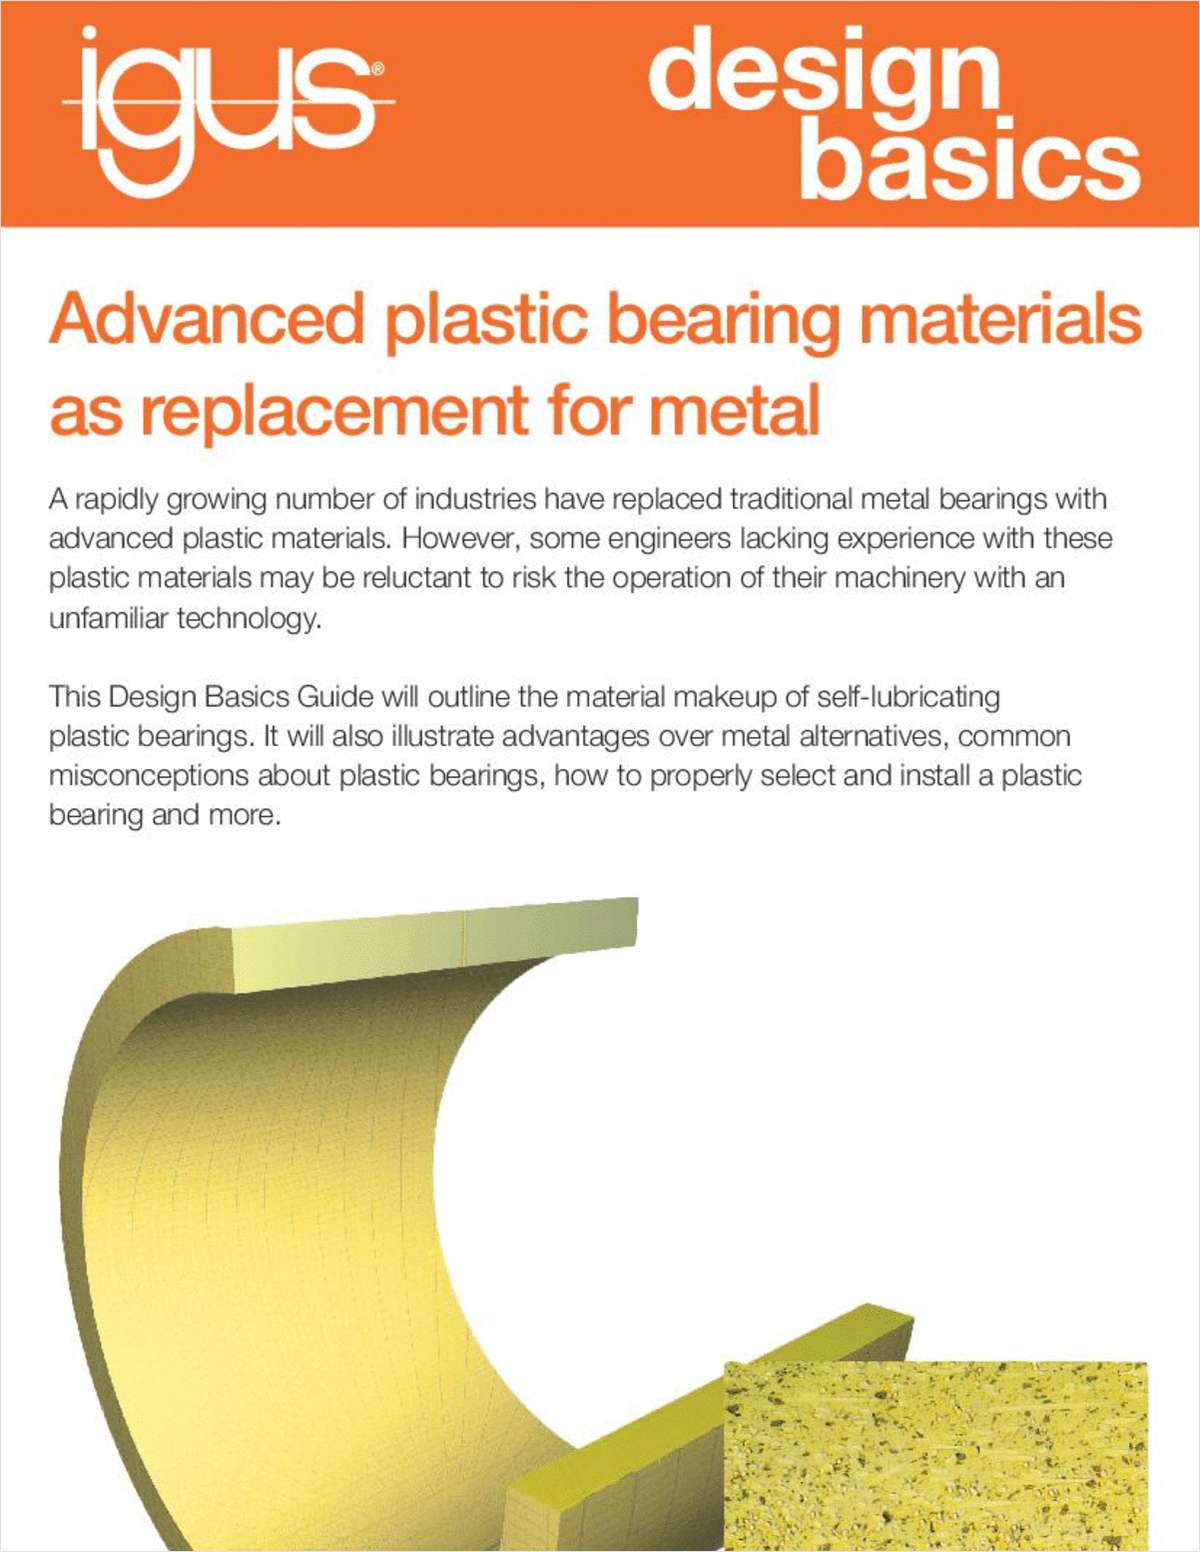 Advanced plastic bearing materials: A viable replacement for metal